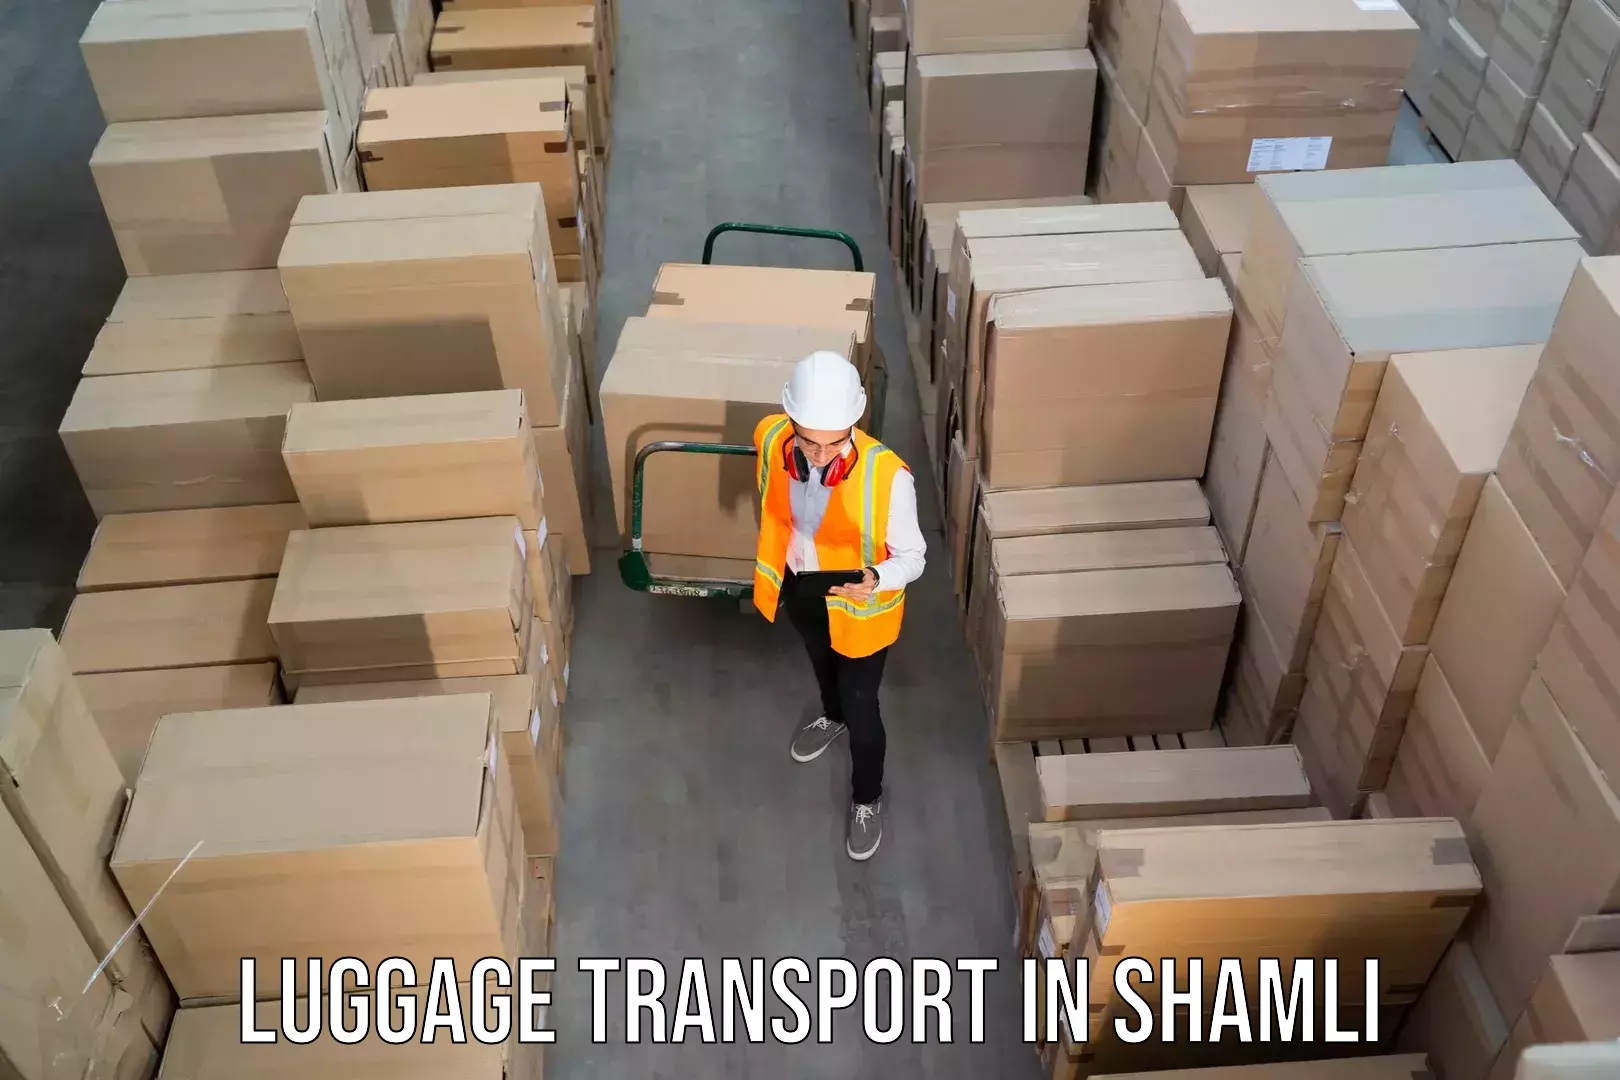 Express luggage delivery in Shamli